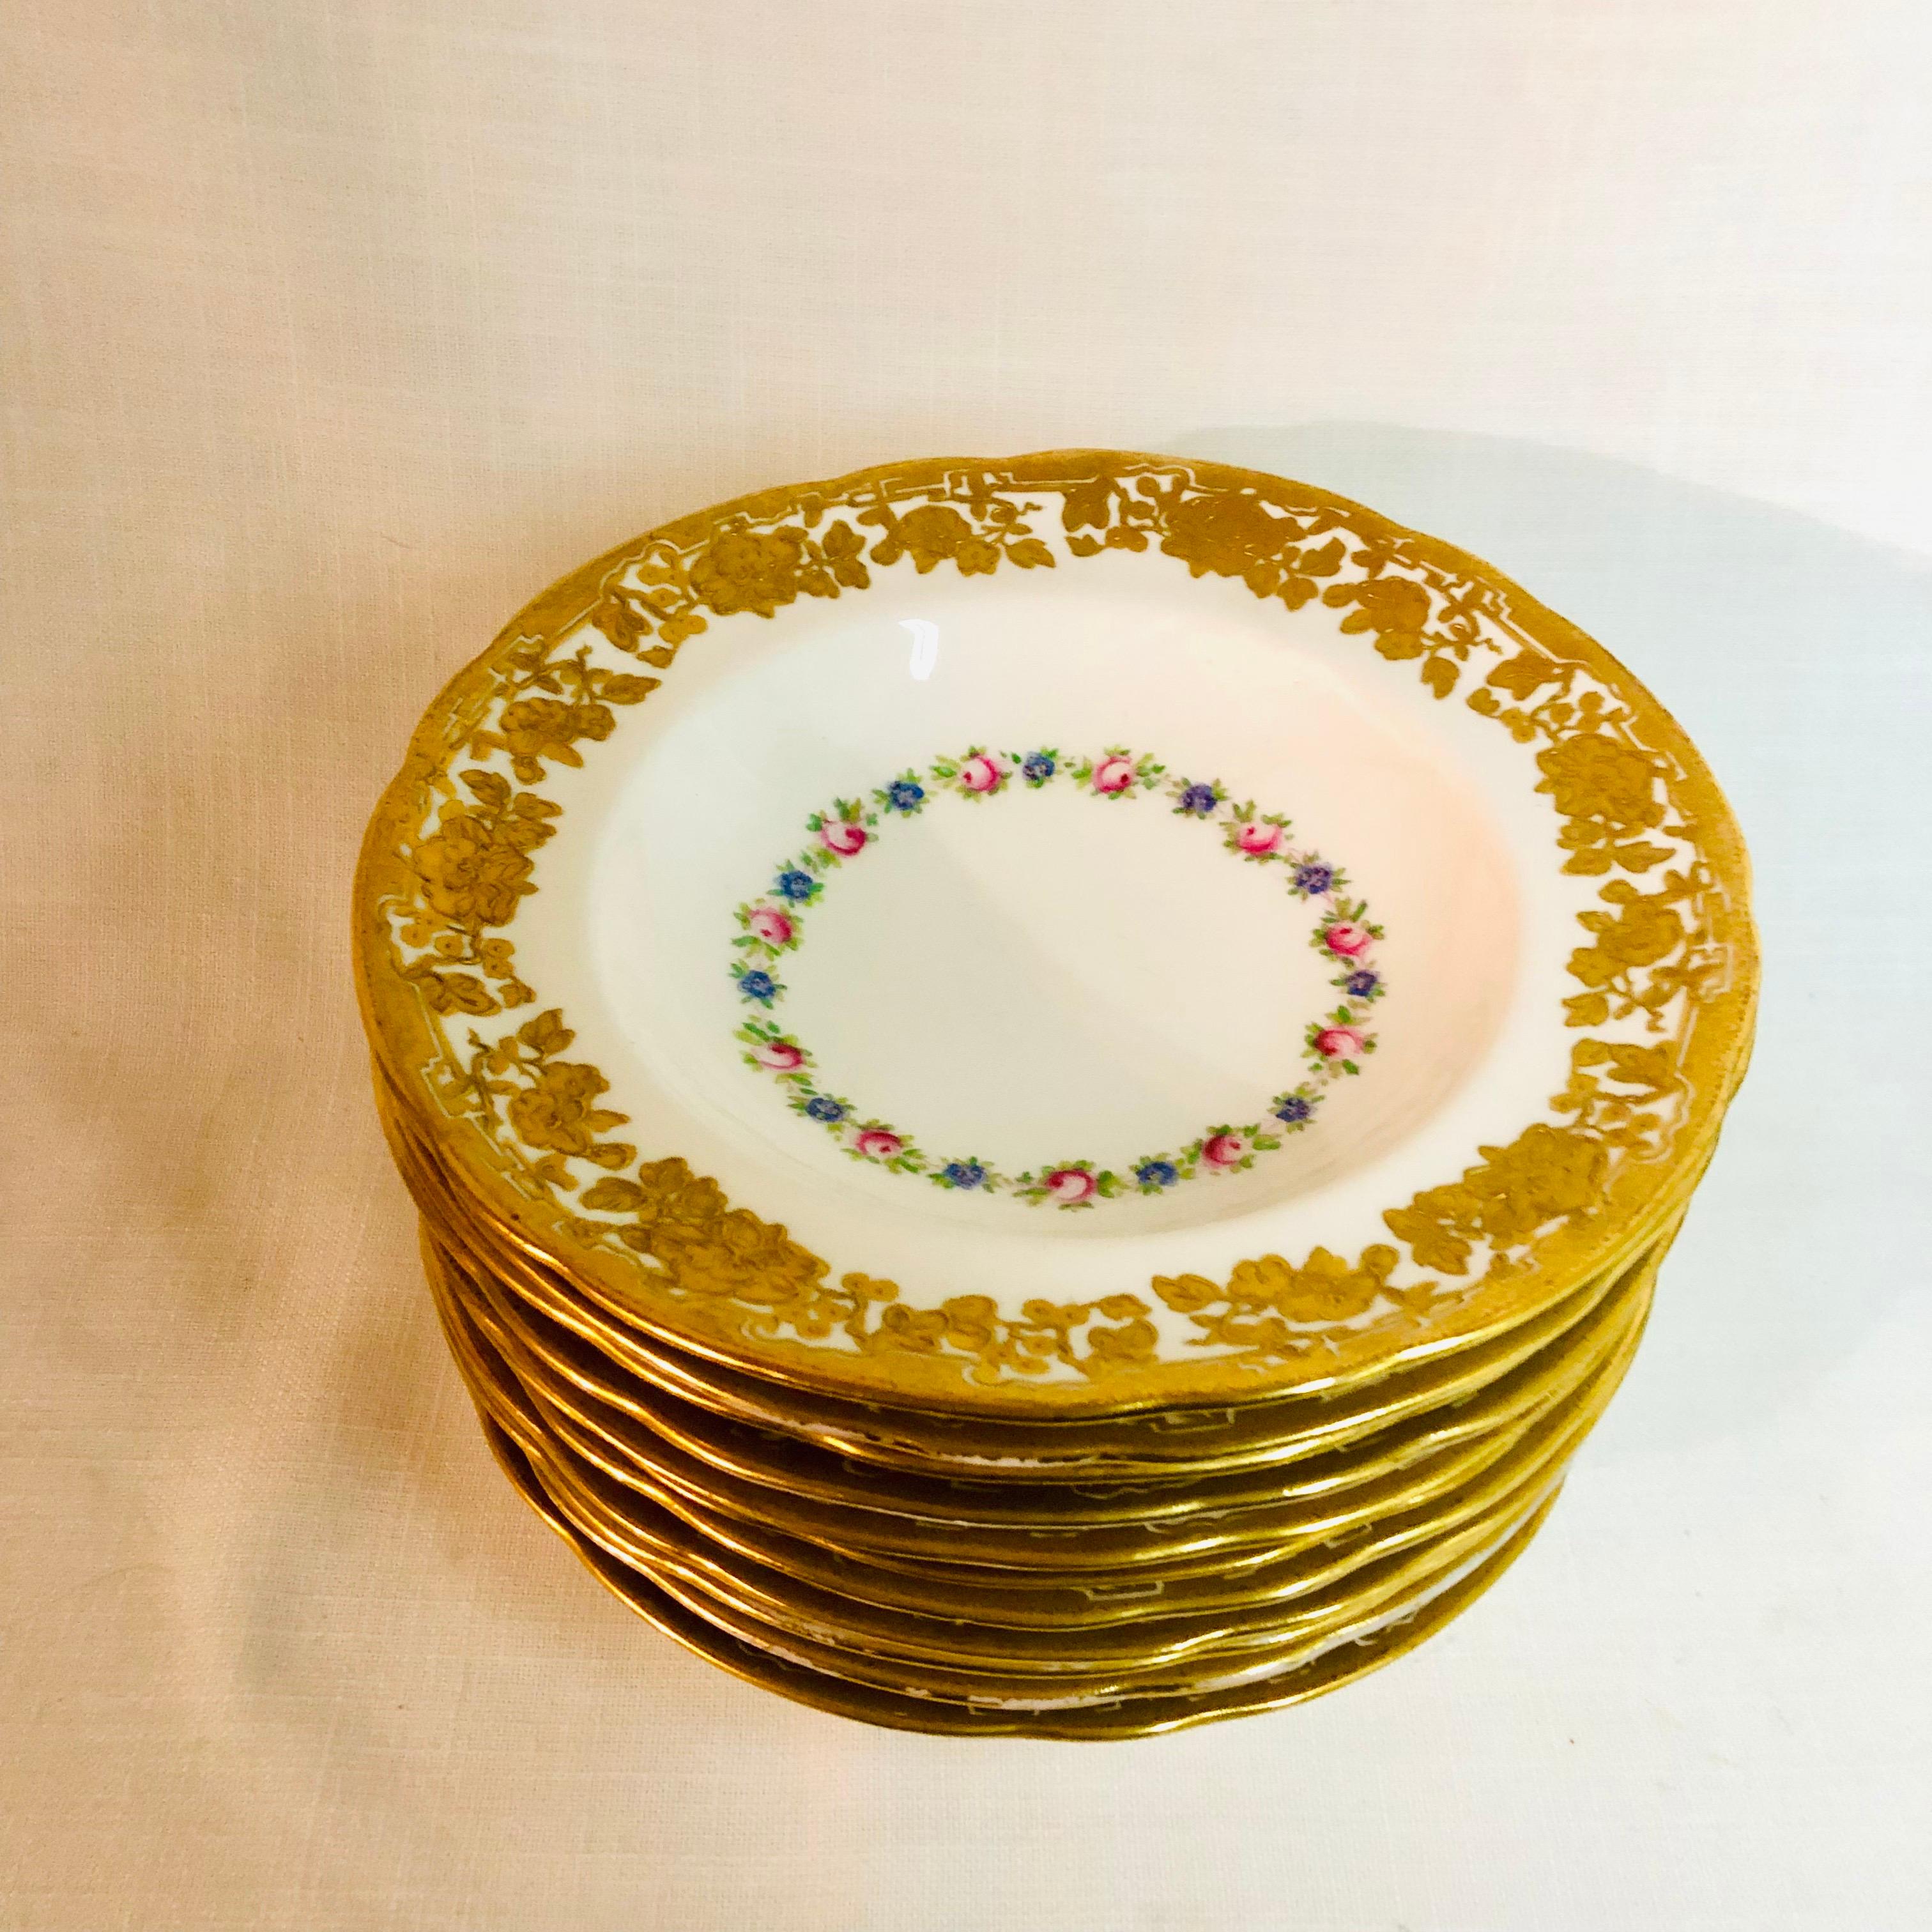 This is a beautiful set of eleven Hammersley and Company English wide rim soup bowls. They were exclusively made for Ovington Brothers in New York, which was a competitor of Tiffany and Company at the time they were made. They have raised gilded